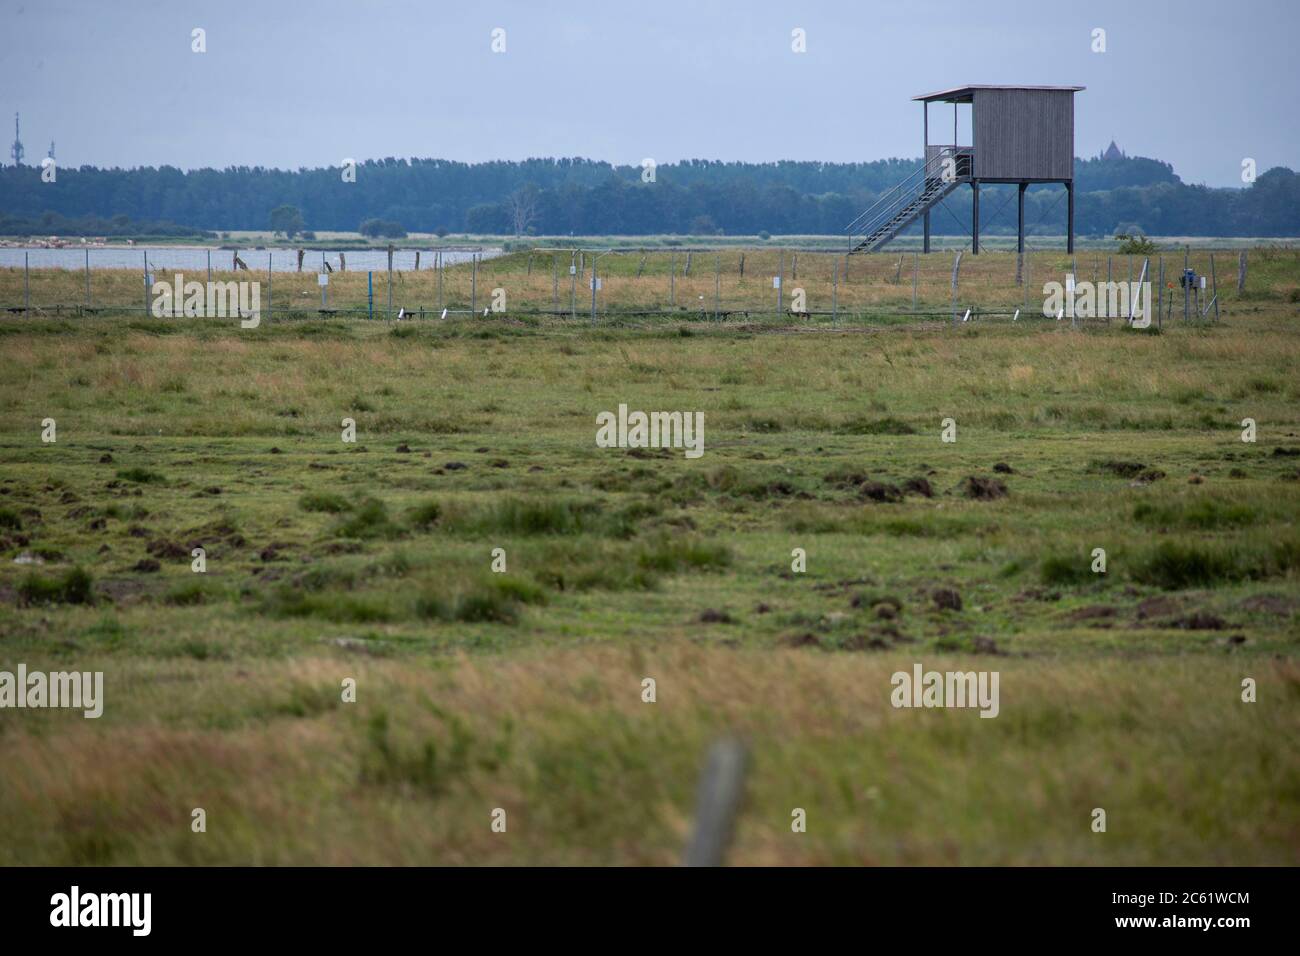 02 July 2020, Mecklenburg-Western Pomerania, Greifswald: An observation tower for visitors is located in the coastal inundation moor on the island path to the nature conservation island Koos in the Greifswald Bodden. After the renaturation, animal and plant species that were thought to be lost have returned to the island in recent years. The Succow Foundation was established in 1999 as the first non-profit nature conservation foundation in the new German states. In 2016 it took over 365 hectares on the island and in the Karrendorf meadows on the mainland. Photo: Jens Büttner/dpa-Zentralbild/ZB Stock Photo